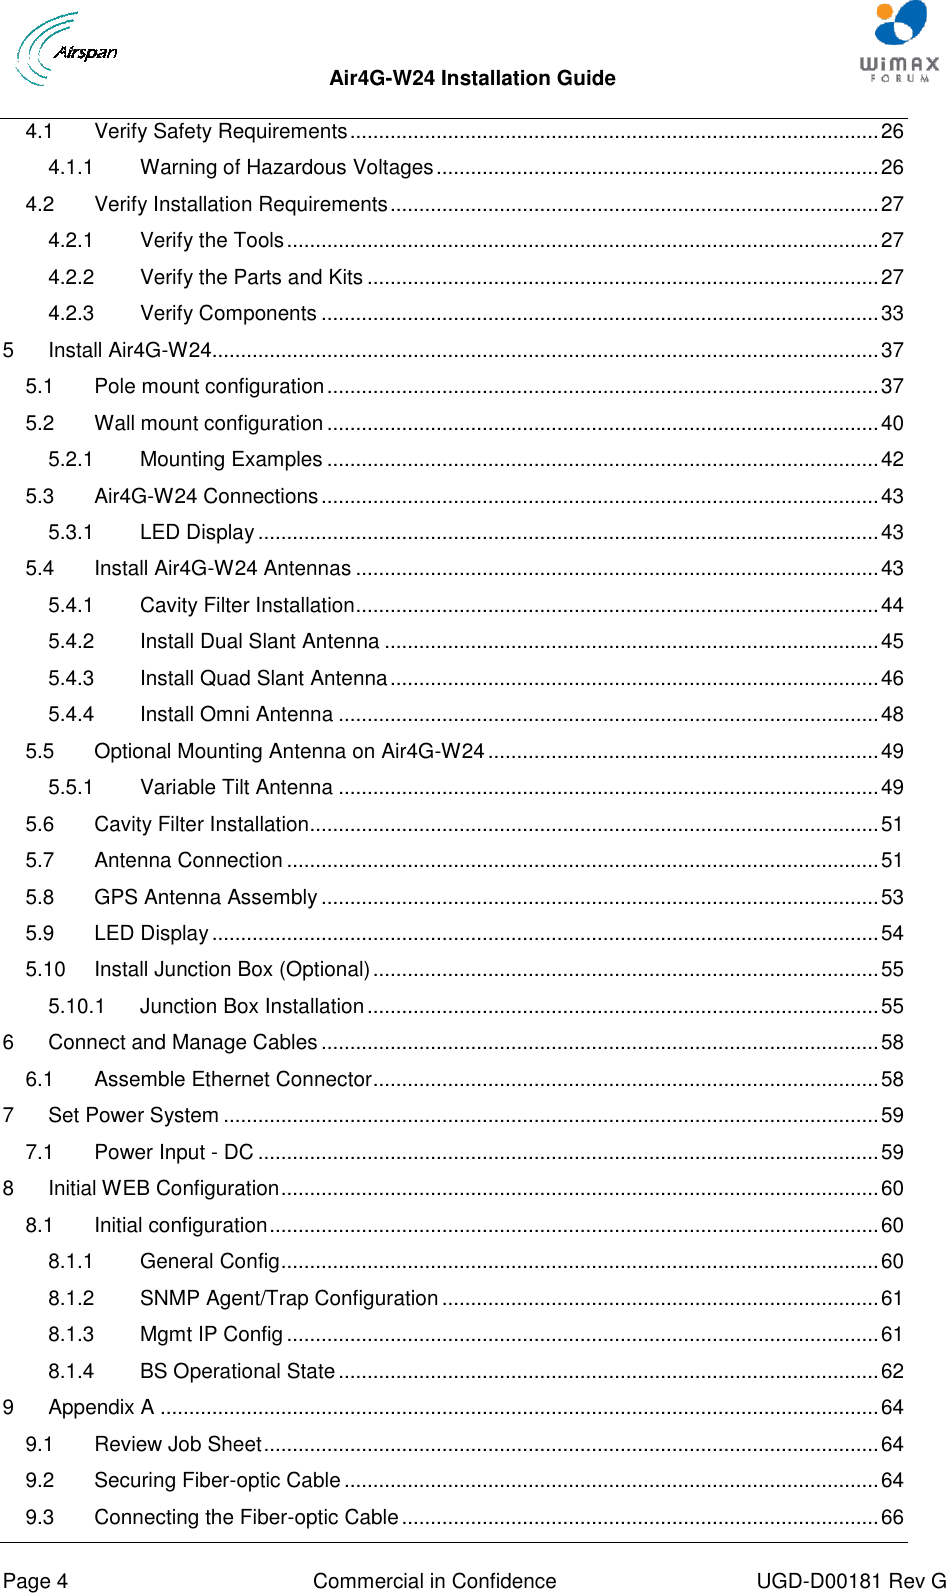  Air4G-W24 Installation Guide     Page 4  Commercial in Confidence  UGD-D00181 Rev G 4.1 Verify Safety Requirements ............................................................................................ 26 4.1.1 Warning of Hazardous Voltages ............................................................................. 26 4.2 Verify Installation Requirements ..................................................................................... 27 4.2.1 Verify the Tools ....................................................................................................... 27 4.2.2 Verify the Parts and Kits ......................................................................................... 27 4.2.3 Verify Components ................................................................................................. 33 5 Install Air4G-W24 .................................................................................................................... 37 5.1 Pole mount configuration ................................................................................................ 37 5.2 Wall mount configuration ................................................................................................ 40 5.2.1 Mounting Examples ................................................................................................ 42 5.3 Air4G-W24 Connections ................................................................................................. 43 5.3.1 LED Display ............................................................................................................ 43 5.4 Install Air4G-W24 Antennas ........................................................................................... 43 5.4.1 Cavity Filter Installation ........................................................................................... 44 5.4.2 Install Dual Slant Antenna ...................................................................................... 45 5.4.3 Install Quad Slant Antenna ..................................................................................... 46 5.4.4 Install Omni Antenna .............................................................................................. 48 5.5 Optional Mounting Antenna on Air4G-W24 .................................................................... 49 5.5.1 Variable Tilt Antenna .............................................................................................. 49 5.6 Cavity Filter Installation................................................................................................... 51 5.7 Antenna Connection ....................................................................................................... 51 5.8 GPS Antenna Assembly ................................................................................................. 53 5.9 LED Display .................................................................................................................... 54 5.10 Install Junction Box (Optional) ........................................................................................ 55 5.10.1 Junction Box Installation ......................................................................................... 55 6 Connect and Manage Cables ................................................................................................. 58 6.1 Assemble Ethernet Connector ........................................................................................ 58 7 Set Power System .................................................................................................................. 59 7.1 Power Input - DC ............................................................................................................ 59 8 Initial WEB Configuration ........................................................................................................ 60 8.1 Initial configuration .......................................................................................................... 60 8.1.1 General Config ........................................................................................................ 60 8.1.2 SNMP Agent/Trap Configuration ............................................................................ 61 8.1.3 Mgmt IP Config ....................................................................................................... 61 8.1.4 BS Operational State .............................................................................................. 62 9 Appendix A ............................................................................................................................. 64 9.1 Review Job Sheet ........................................................................................................... 64 9.2 Securing Fiber-optic Cable ............................................................................................. 64 9.3 Connecting the Fiber-optic Cable ................................................................................... 66 